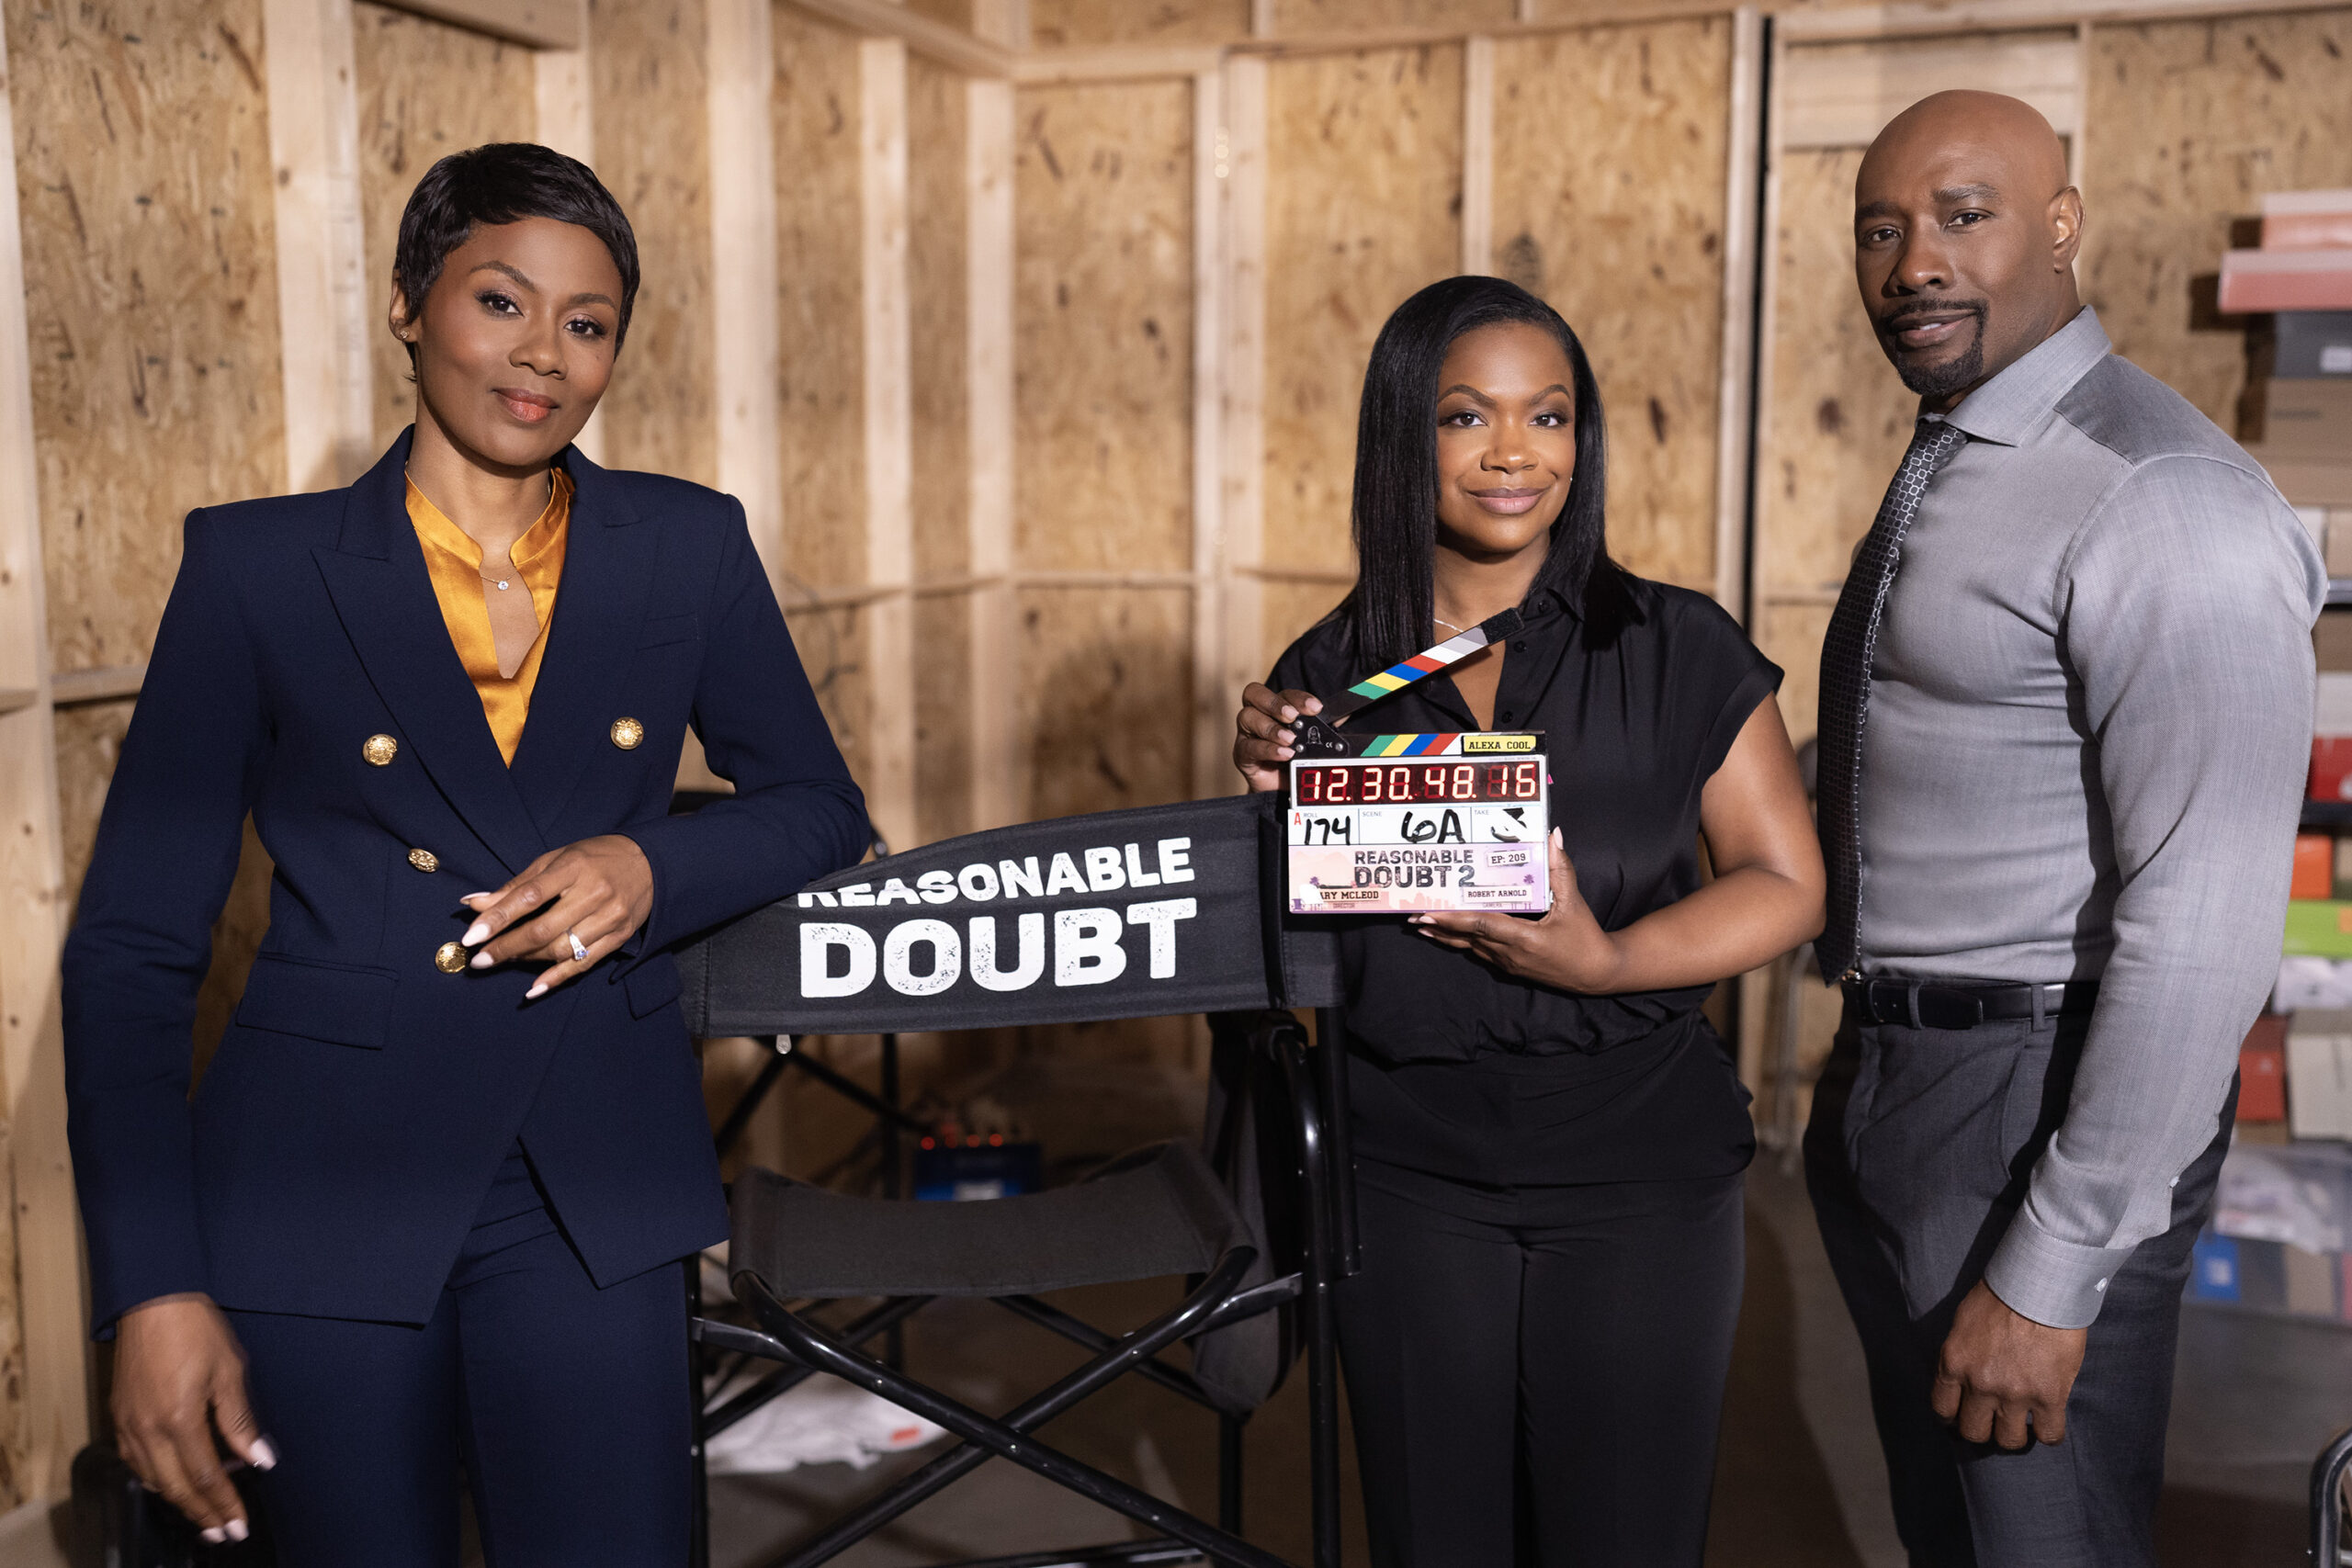 'Reasonable Doubt' Season 2 Adds Kandi Burruss, Drops New First Look Images